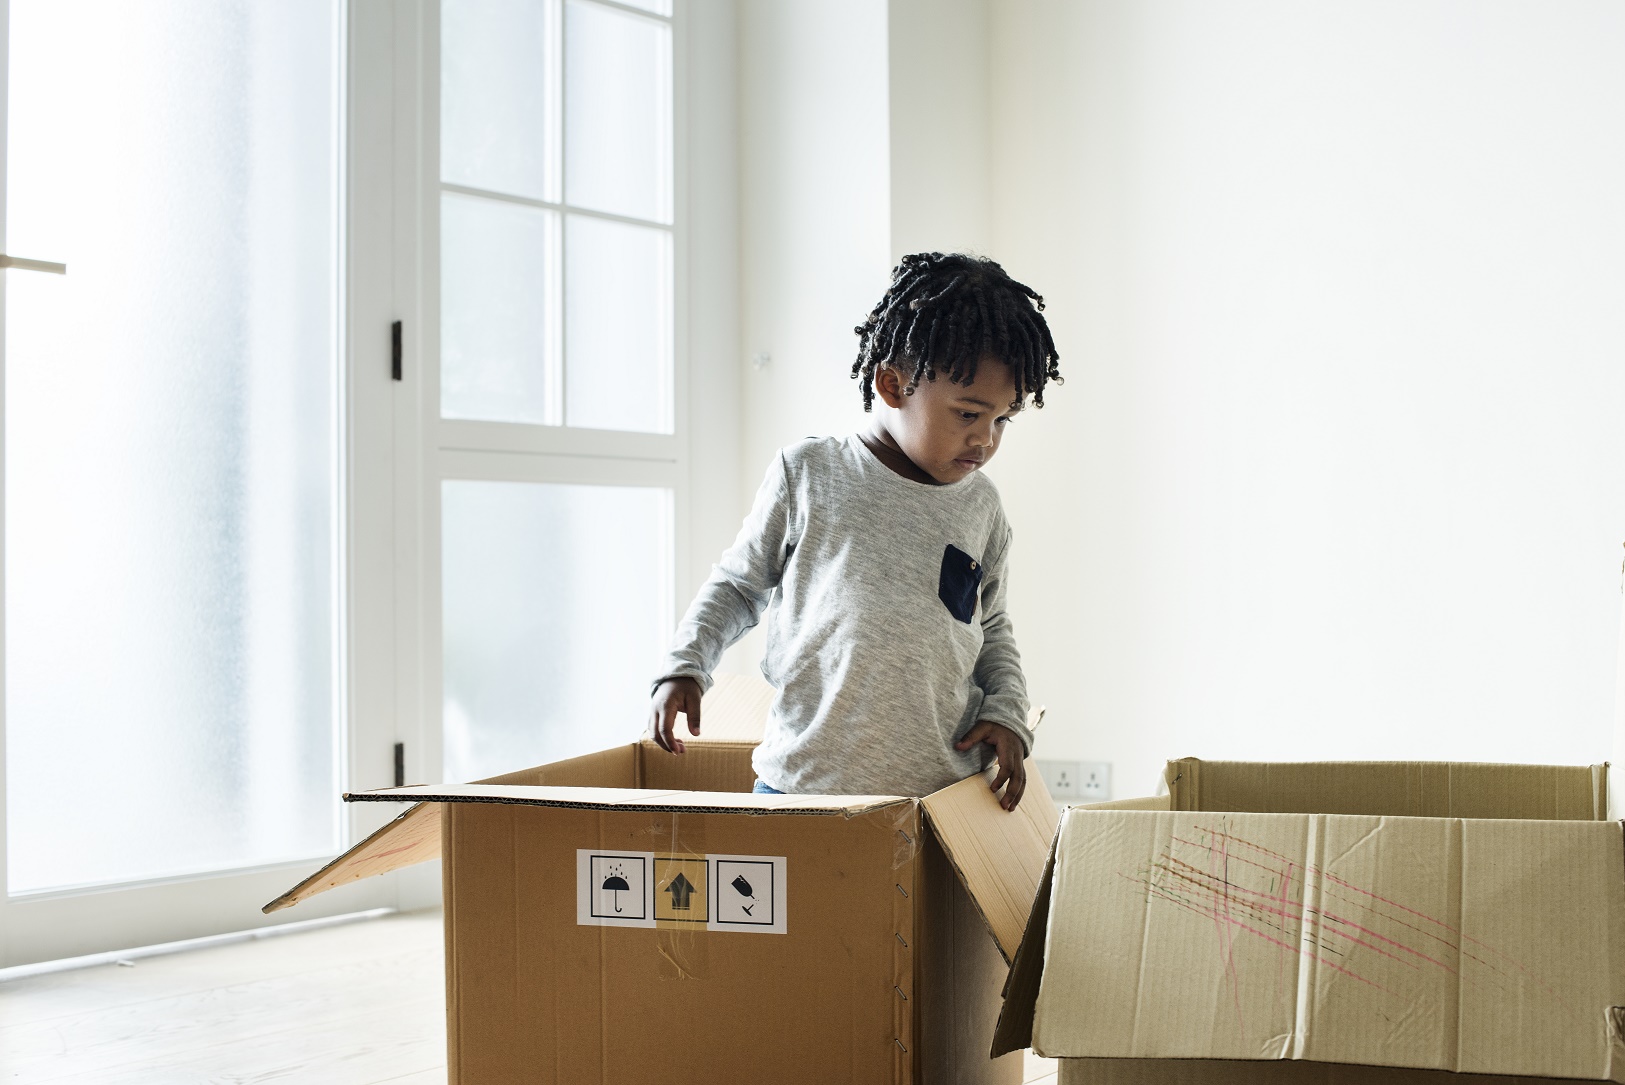 What’s in that box? Simple objects encourage a child’s imagination more than we realize